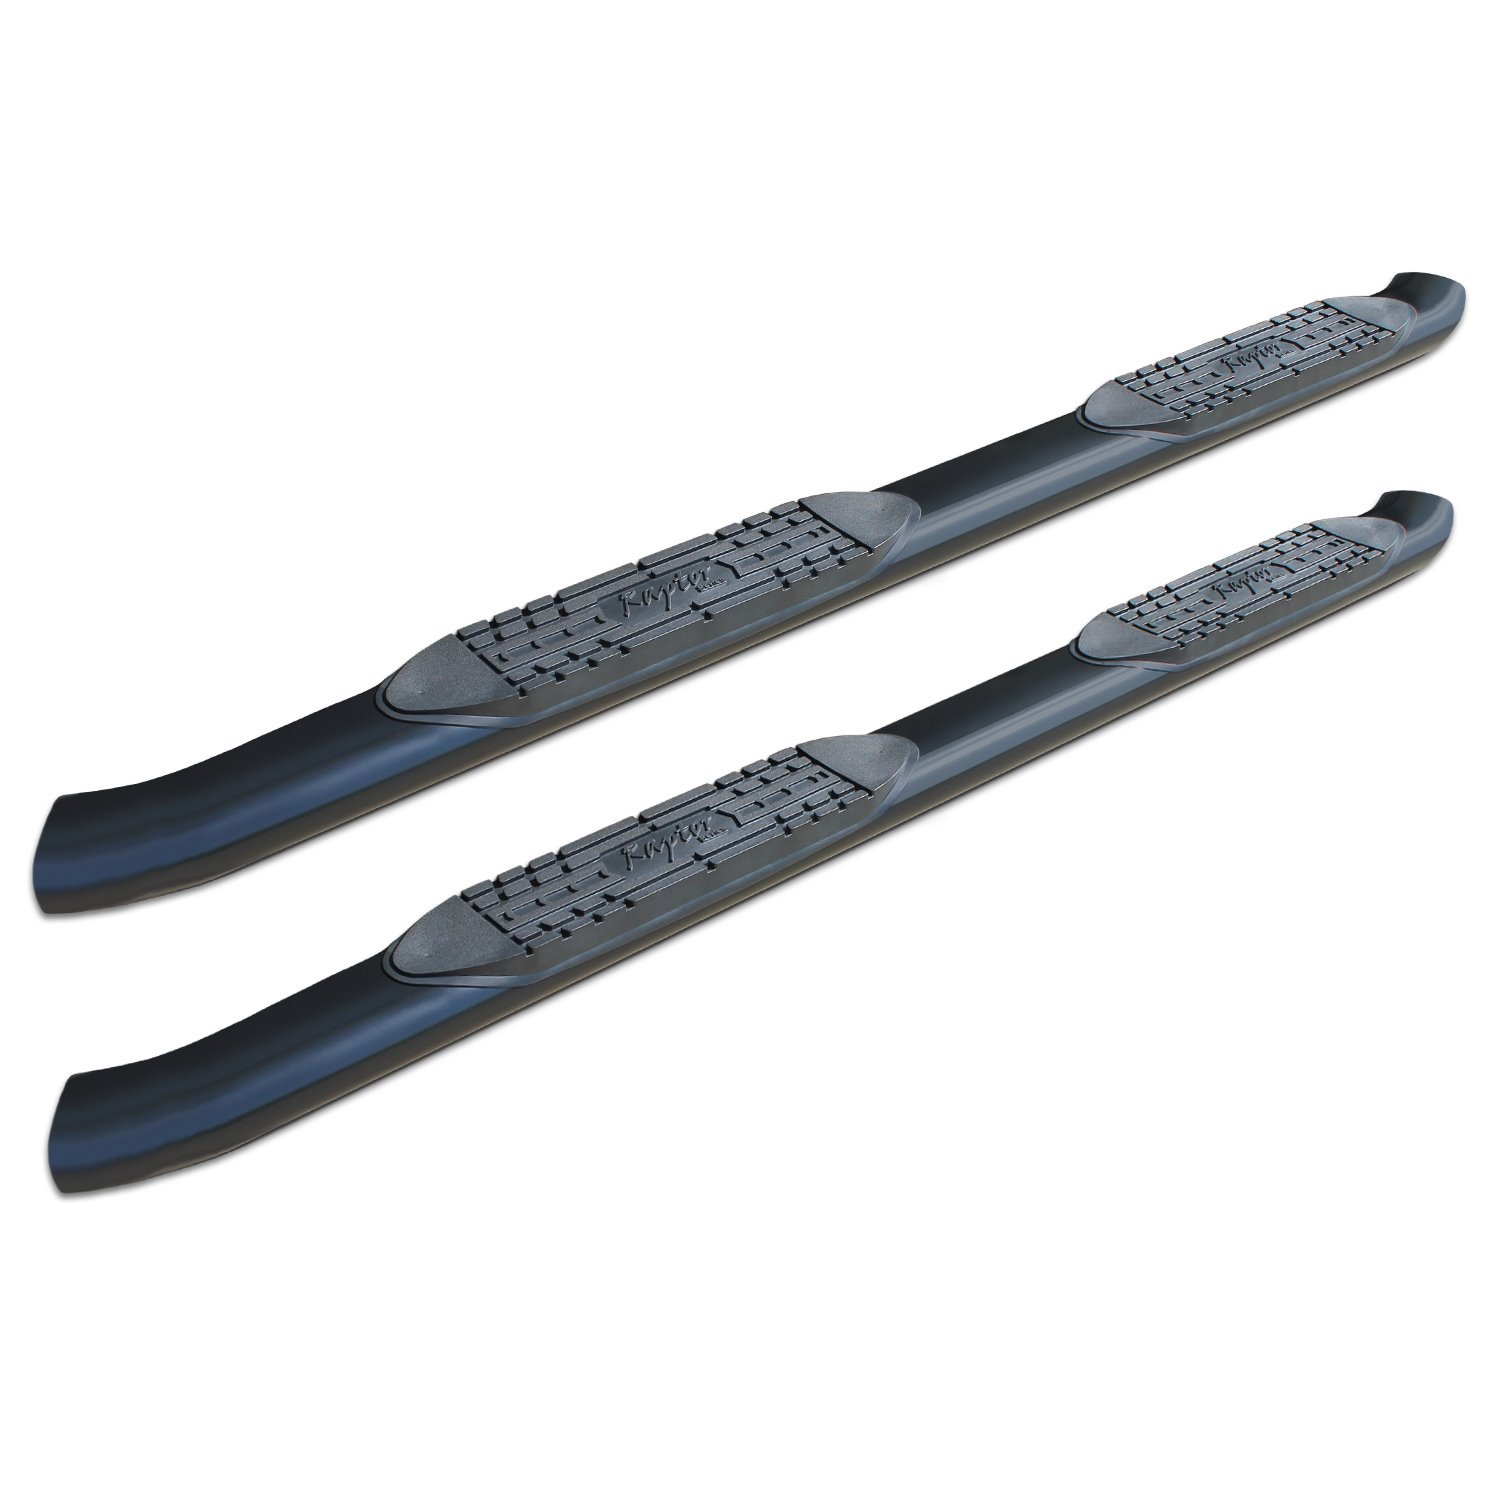 1601-0422B 5 in OE Style Curved Oval Steps, Black Alloy Steel, Fits Select Chevy Silverado/GMC Sierra 1500/2500/3500